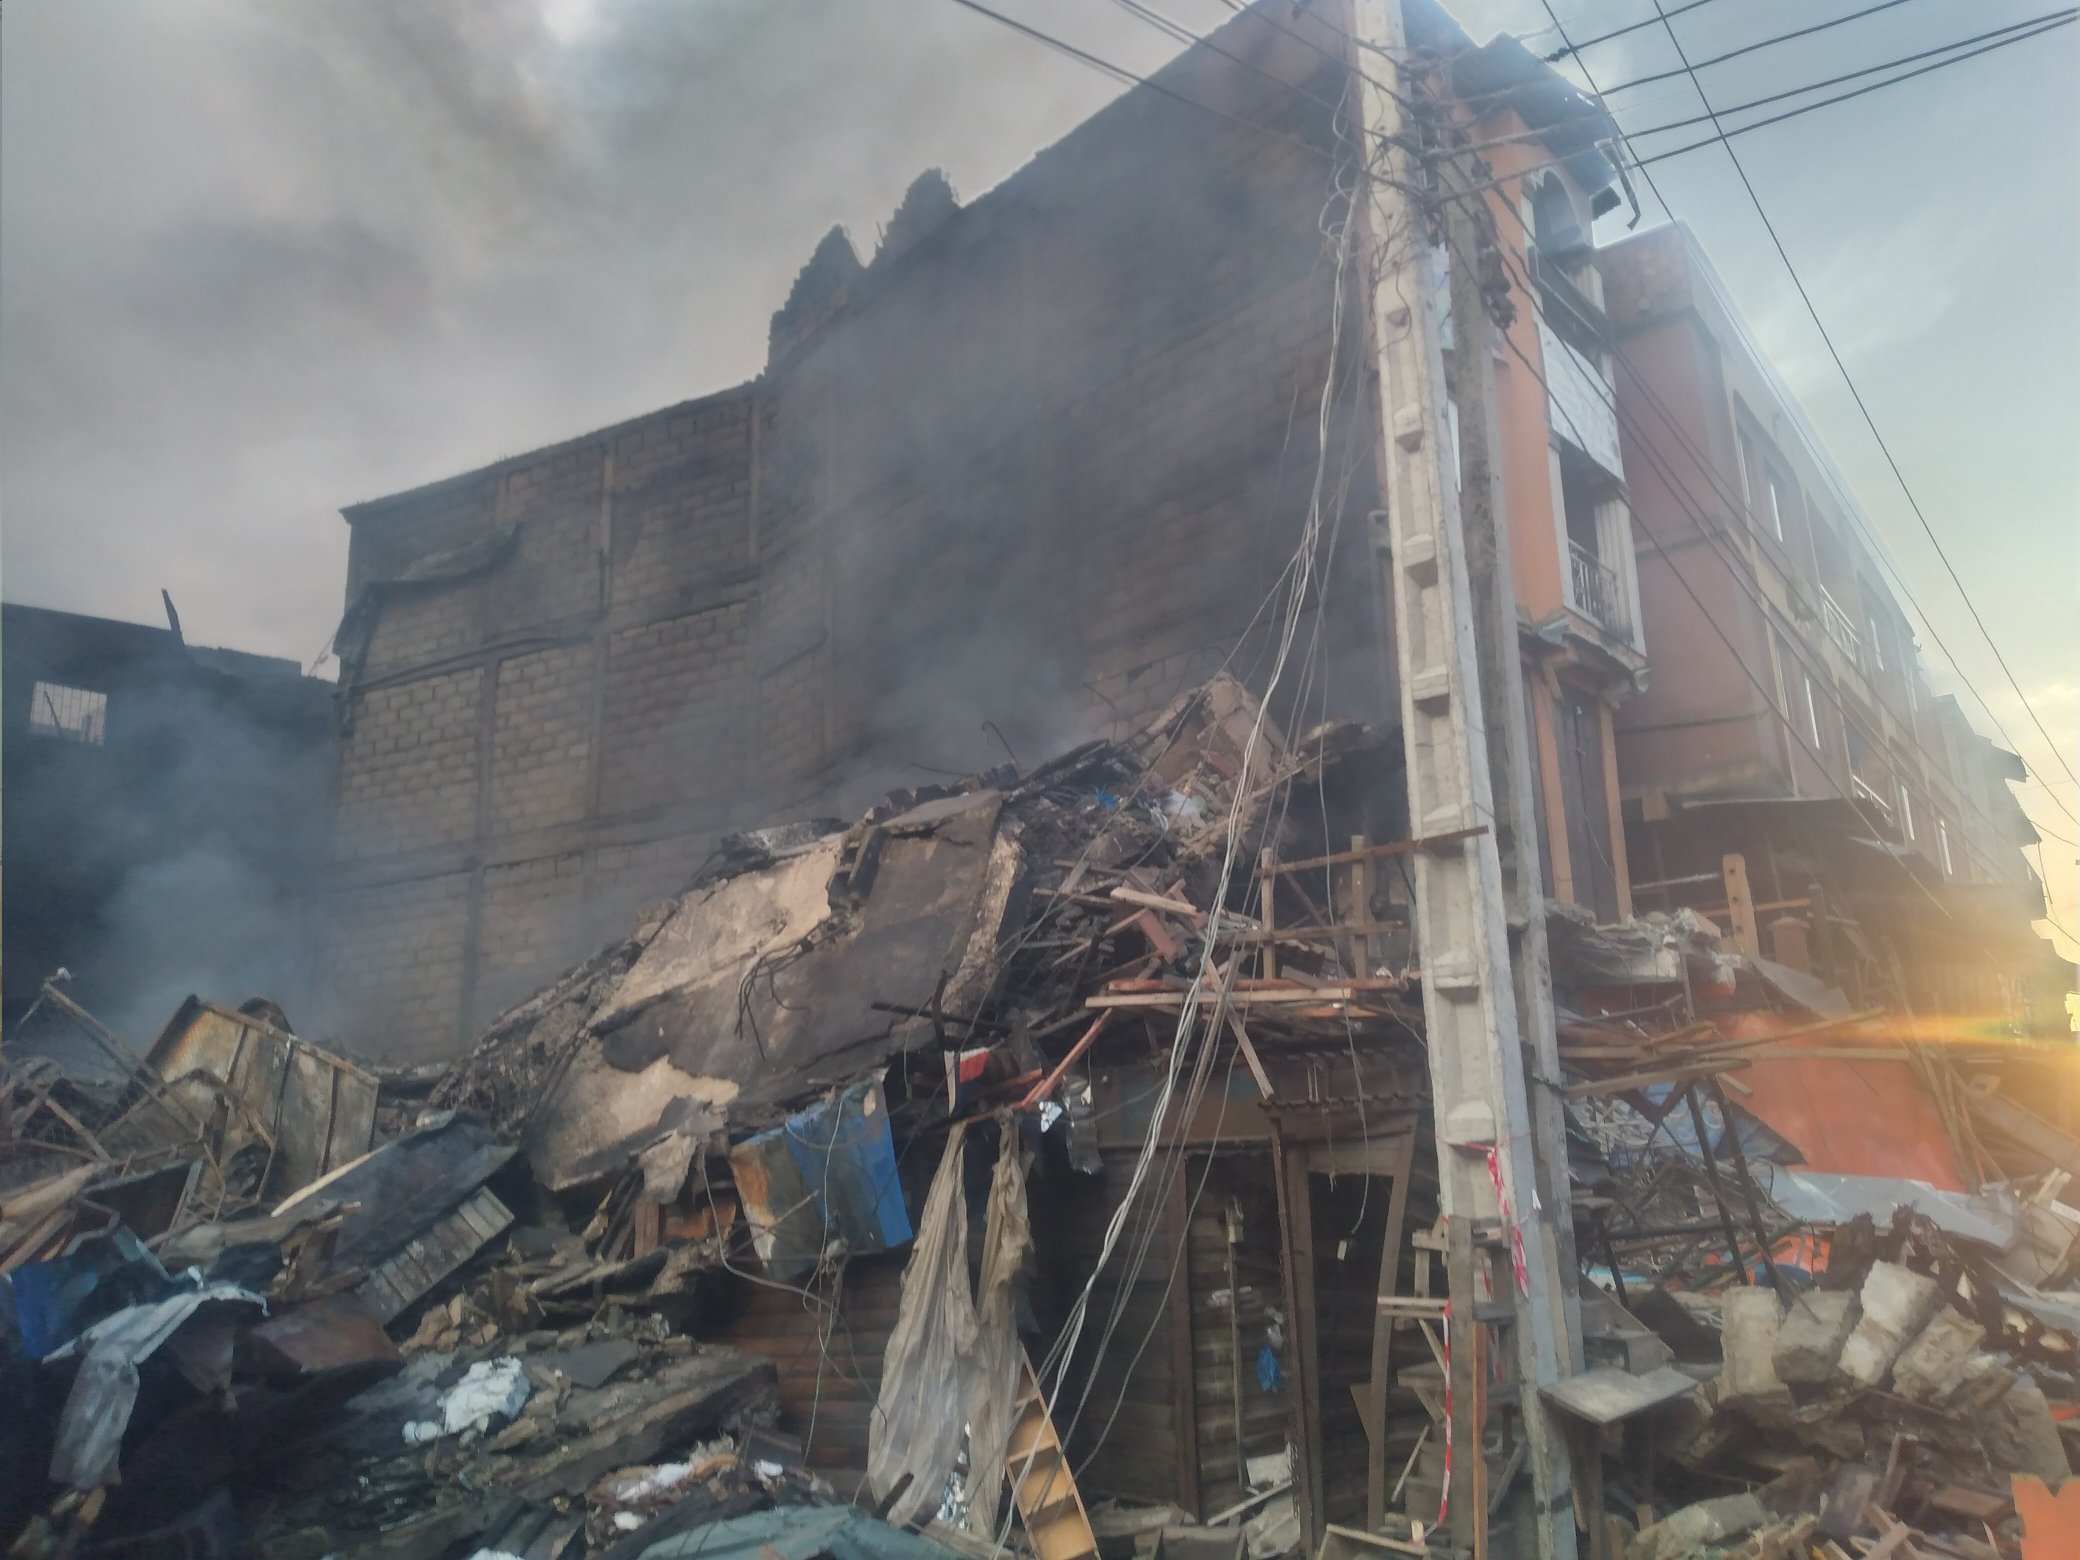 LSFRS says one life was lost in the Dosunmu Market fire incident